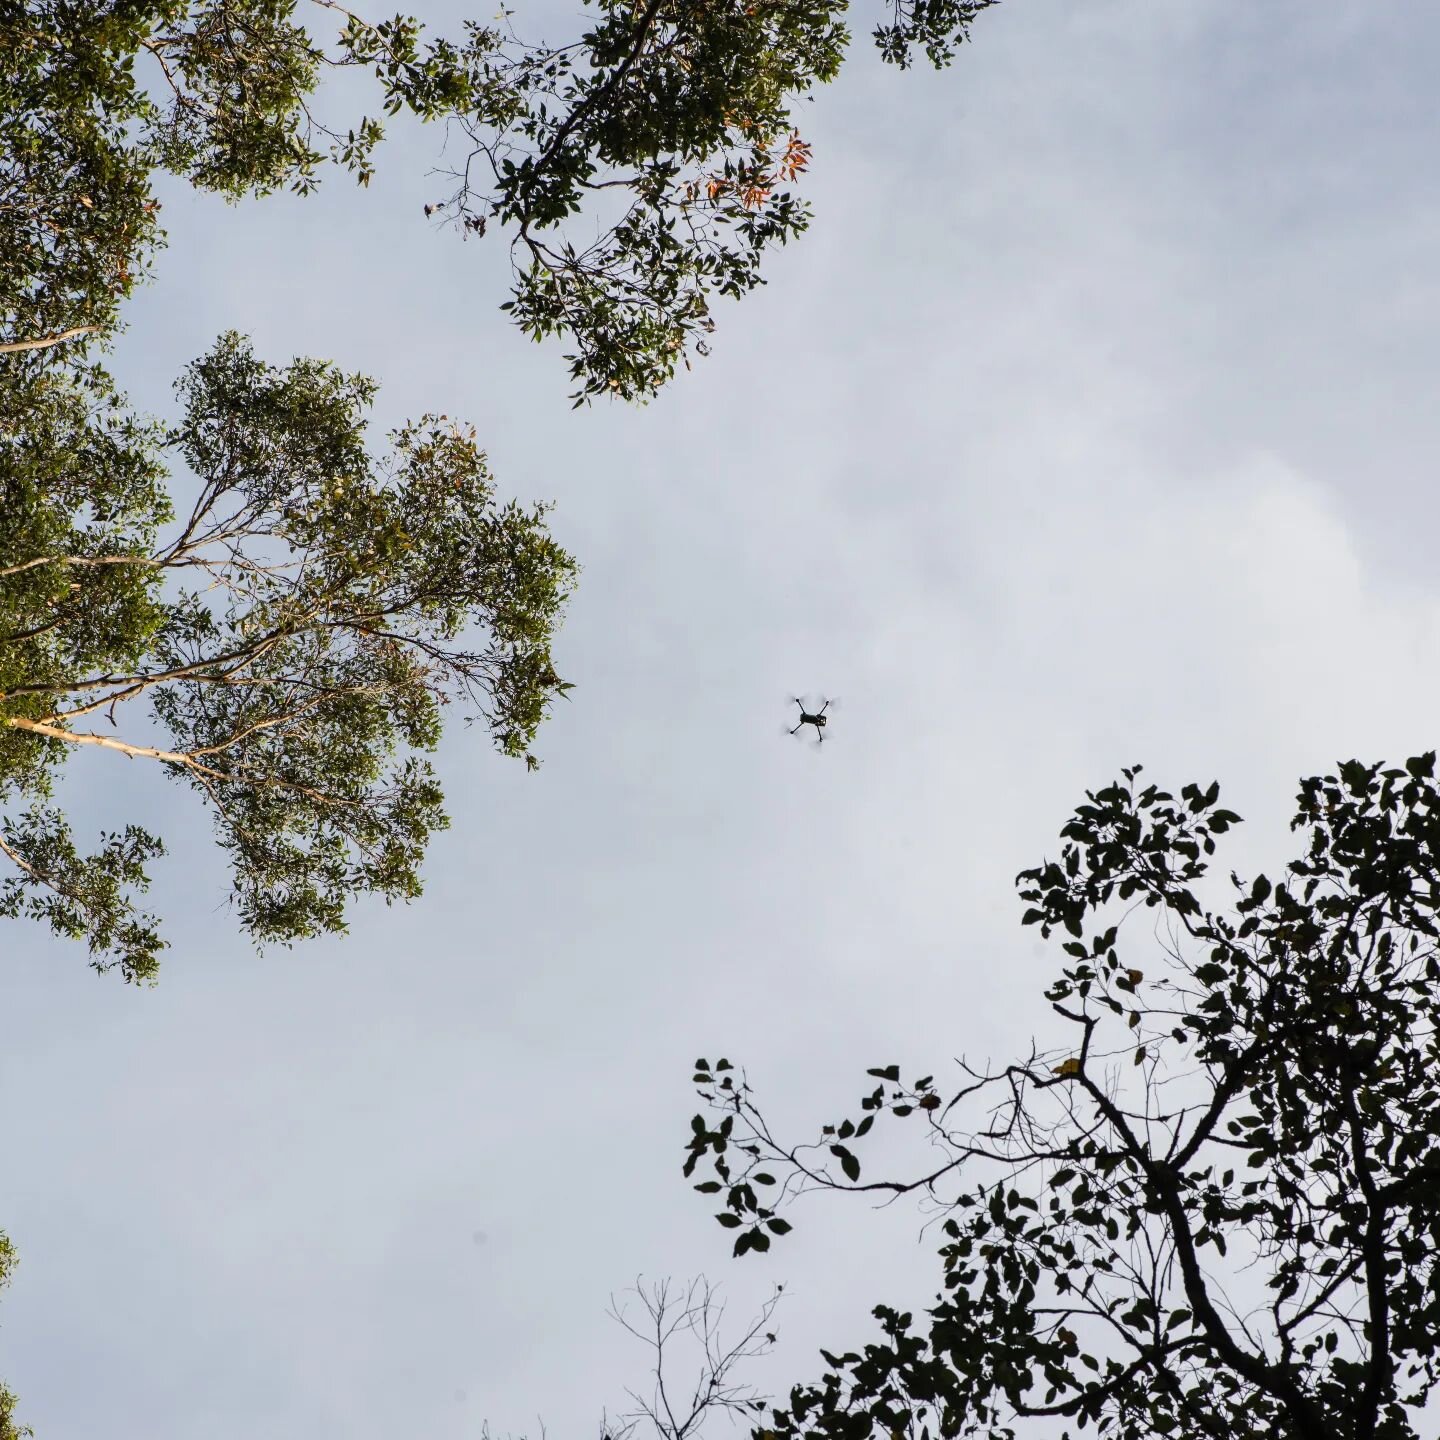 | 𝗗𝗥𝗢𝗡𝗘𝗦

Here at South West Honey, we use drones to give us a birds eye view of the giants of the forest 🌳 

These aerial surveys allow us to closely monitor flower cover so we can chase that golden goodness 🍯 

#uav #drone #aerialphoyograph